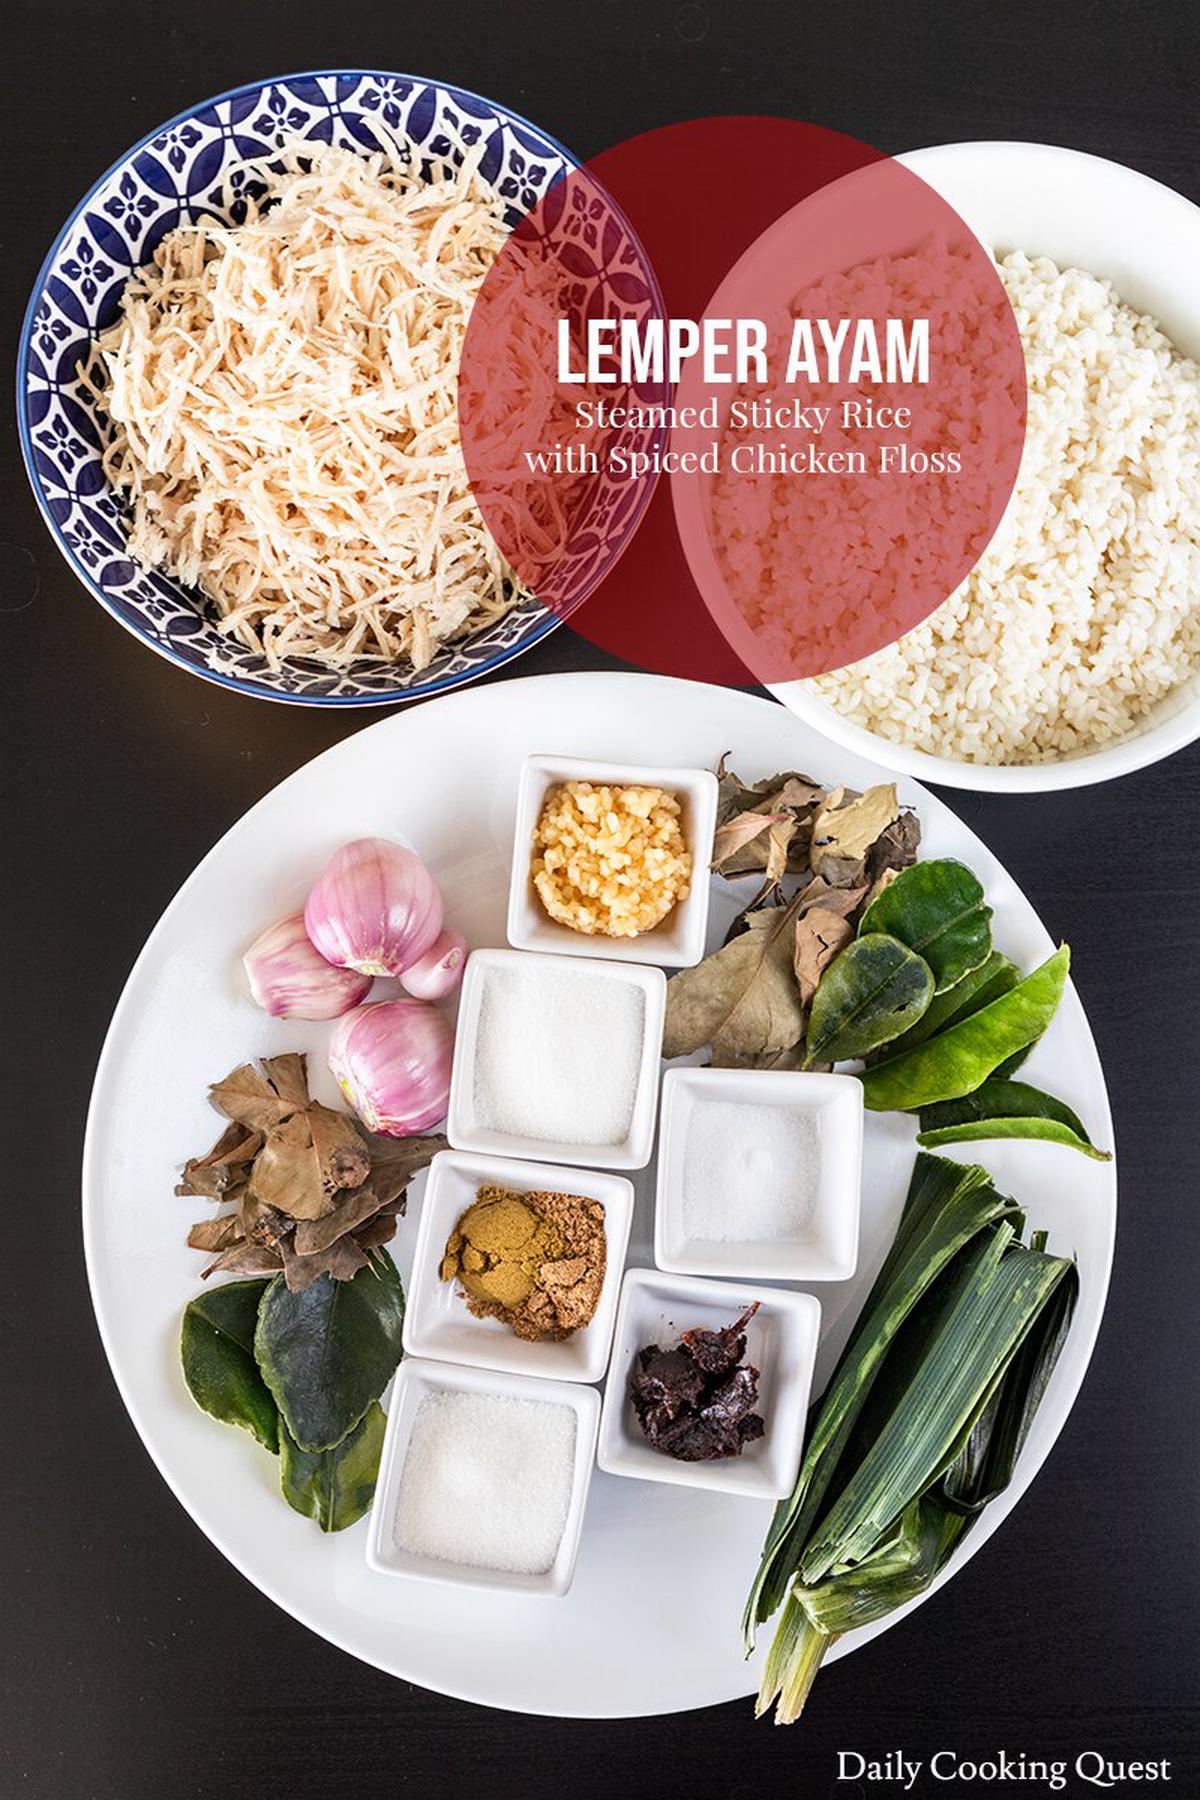 Lemper Ayam - Steamed Glutinous Rice with Spiced Chicken Floss